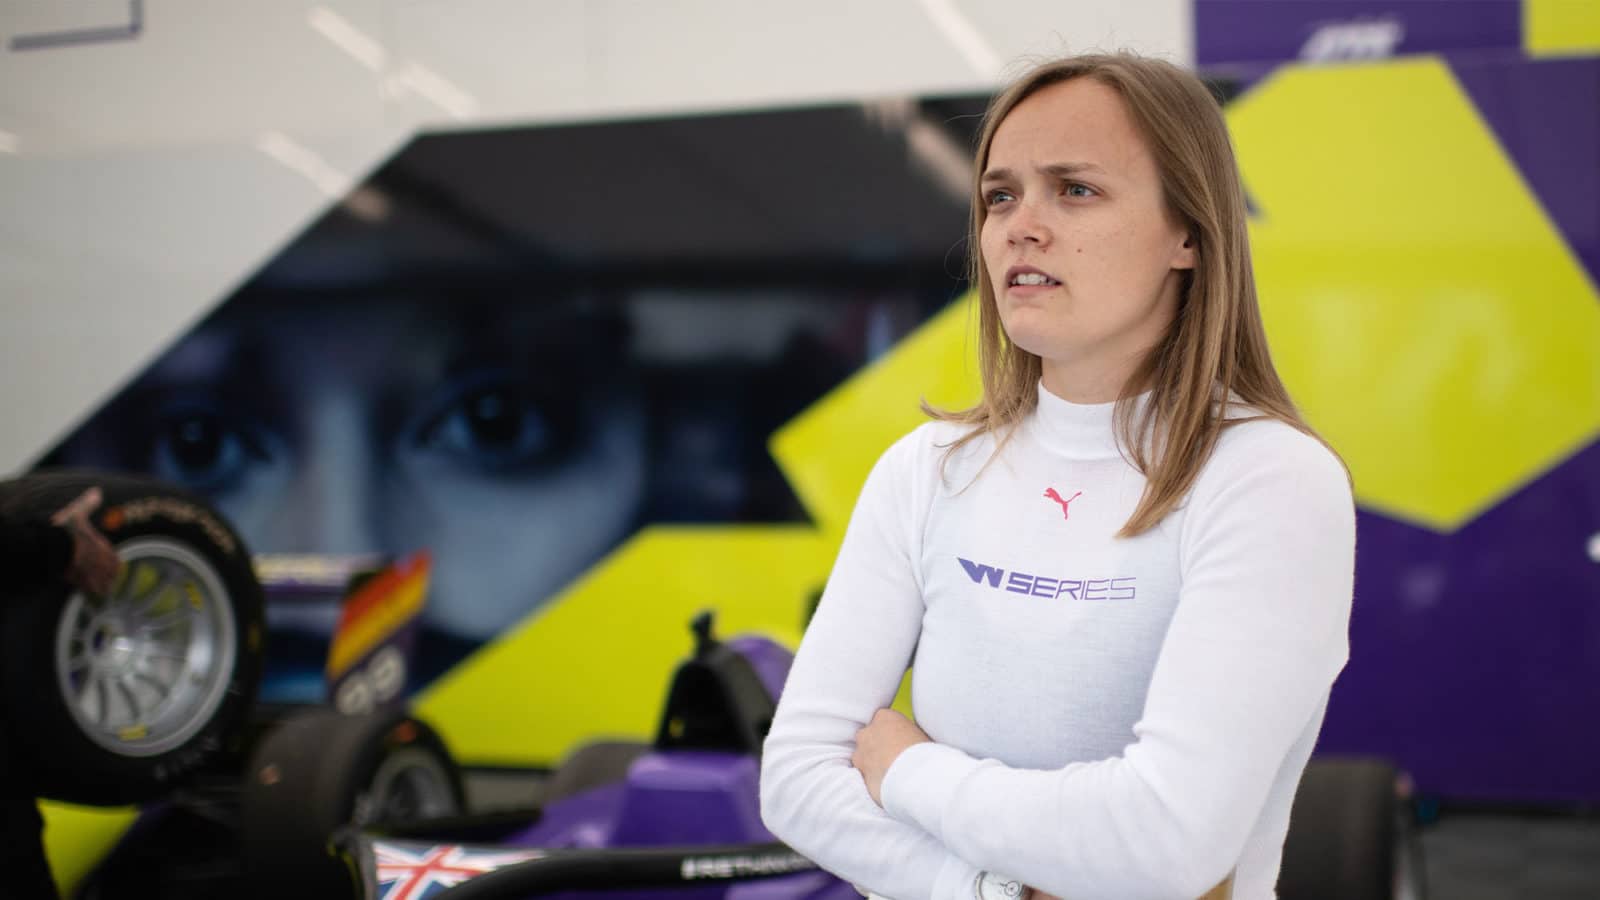 HOCKENHEIM, GERMANY - MAY 03: Sarah Moore of Great Britain seen during a training session prior to the first race of the W Series at Hockenheimring on May 03, 2019 in Hockenheim, Germany. W Series aims to give female drivers an opportunity in motorsport that hasn’t been available to them before. The first race of the series, which encompasses six rounds on the DTM support program, is at the Hockenheimring on May 3rd and 4th. (Photo by Matthias Hangst/Getty Images)